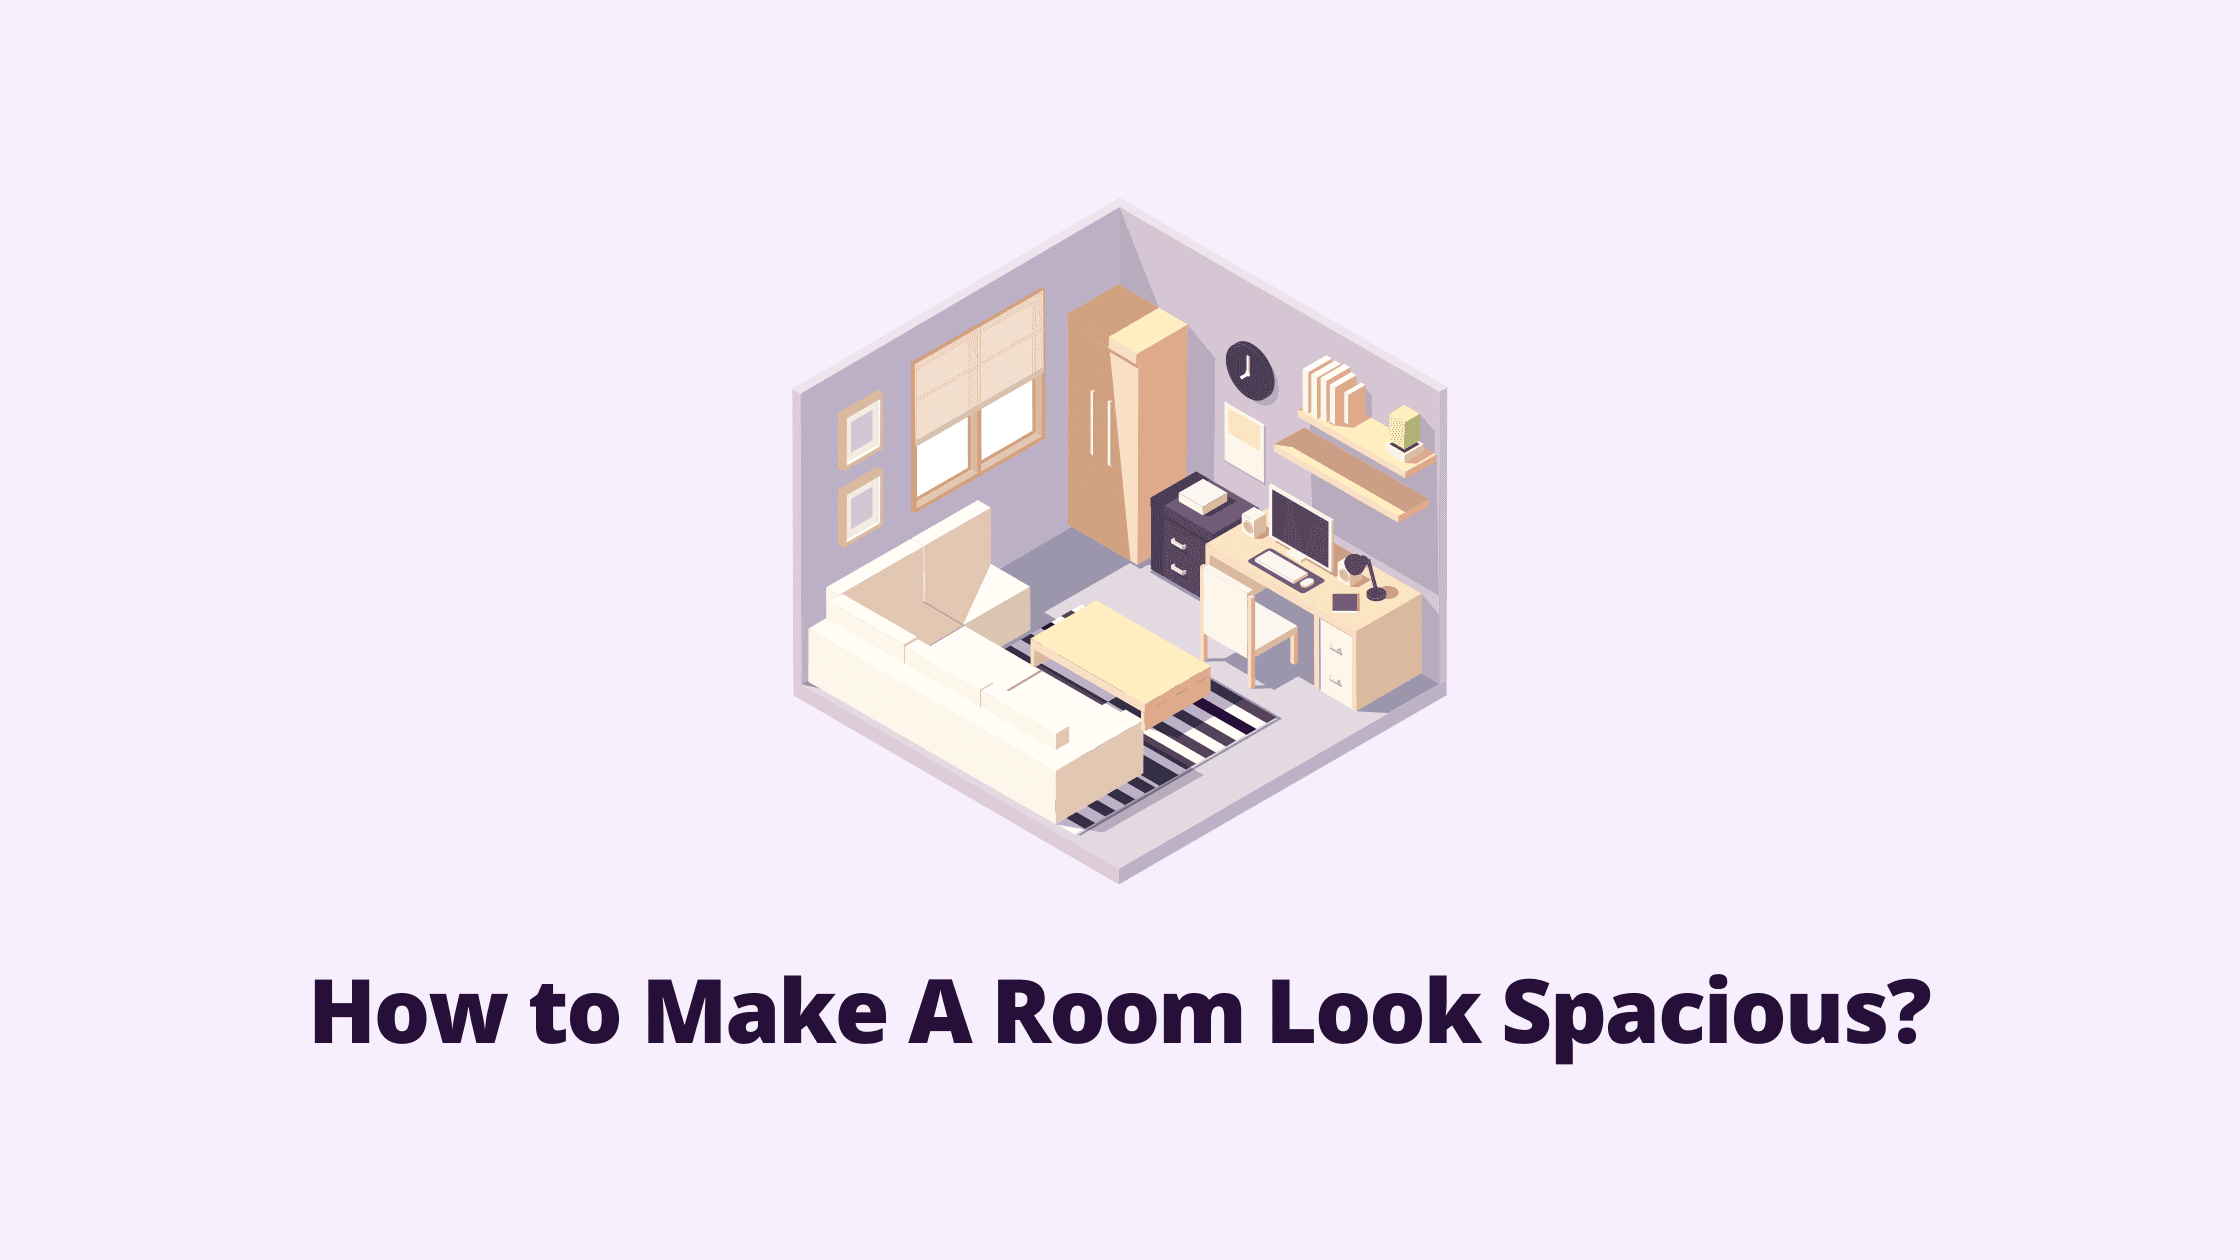 How to Make A Room Look Spacious?